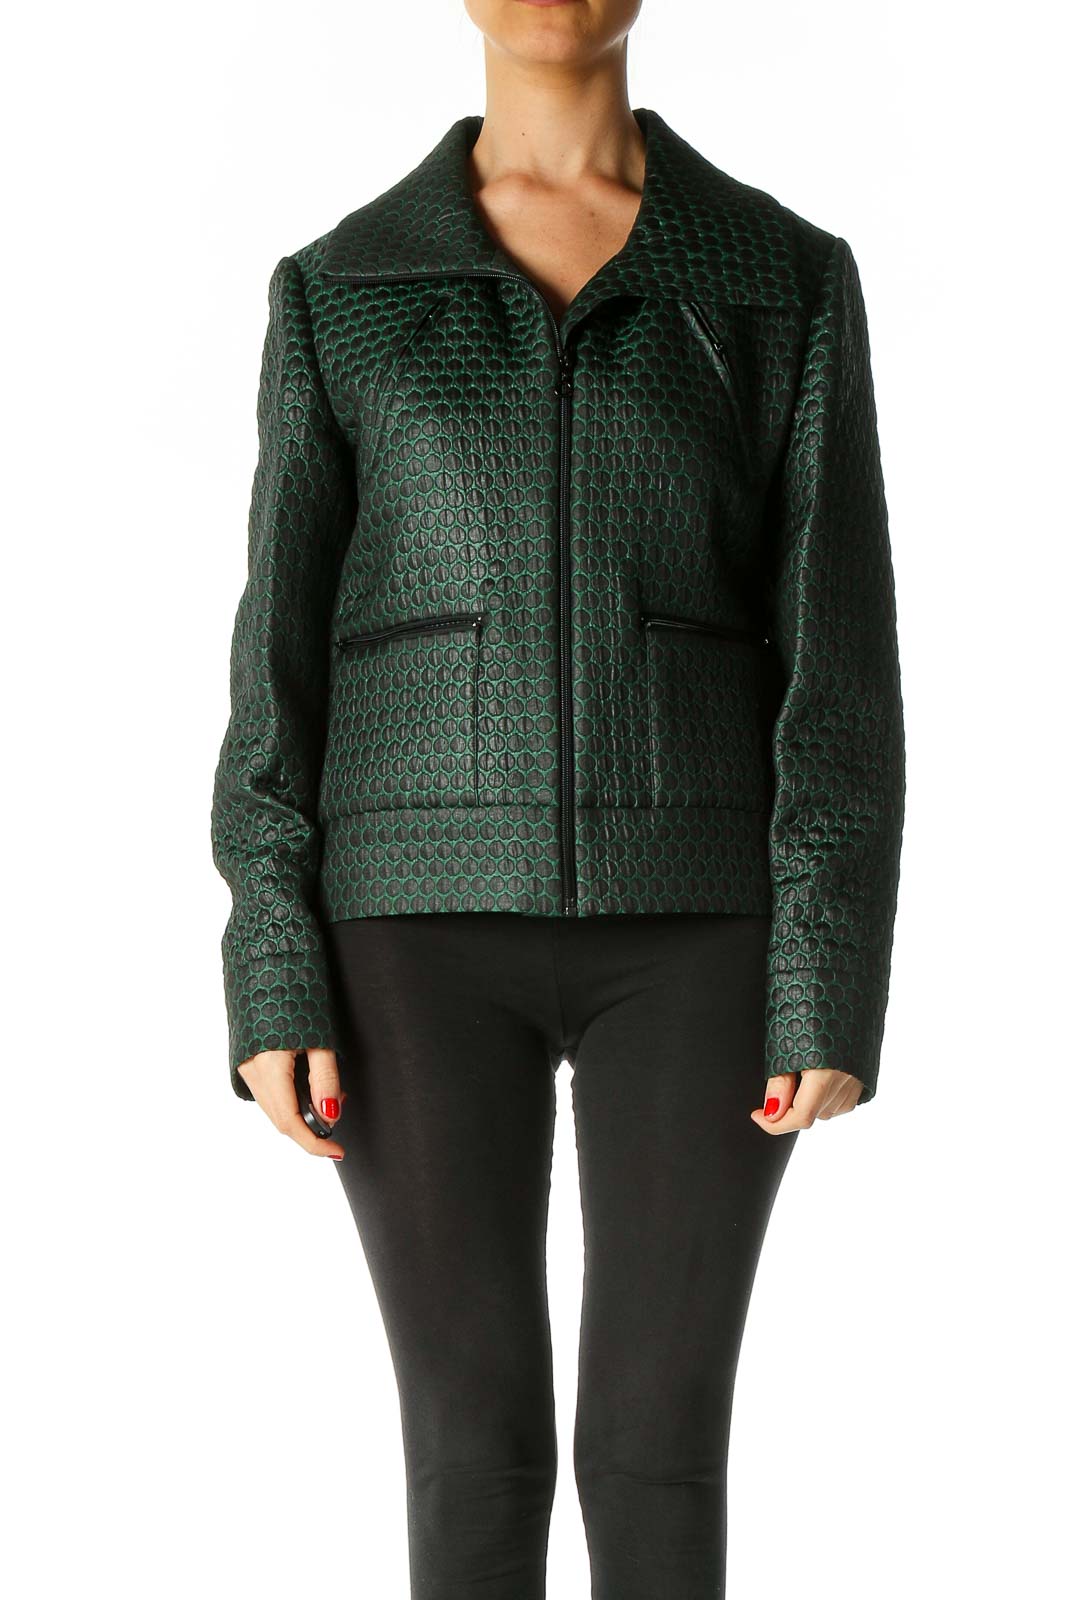 Green Textured Jacket Front